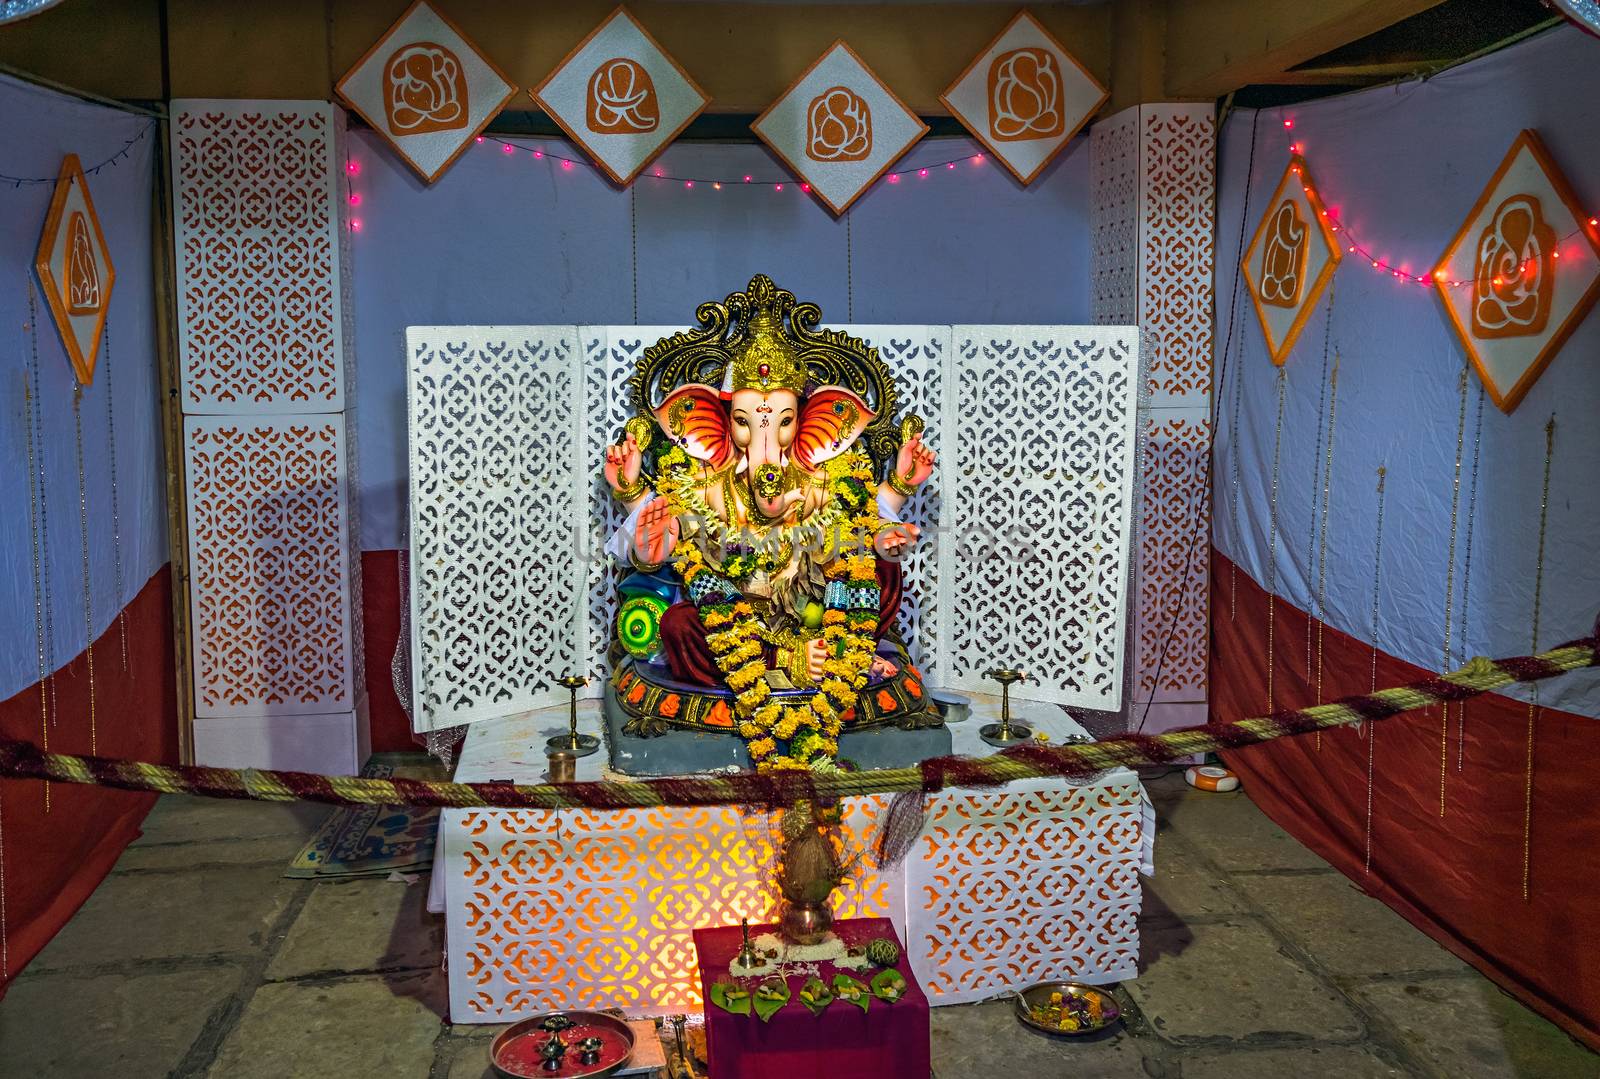 Garlanded deity idol of Lord Ganesha installed with background decorations for festival, in Pune, india.